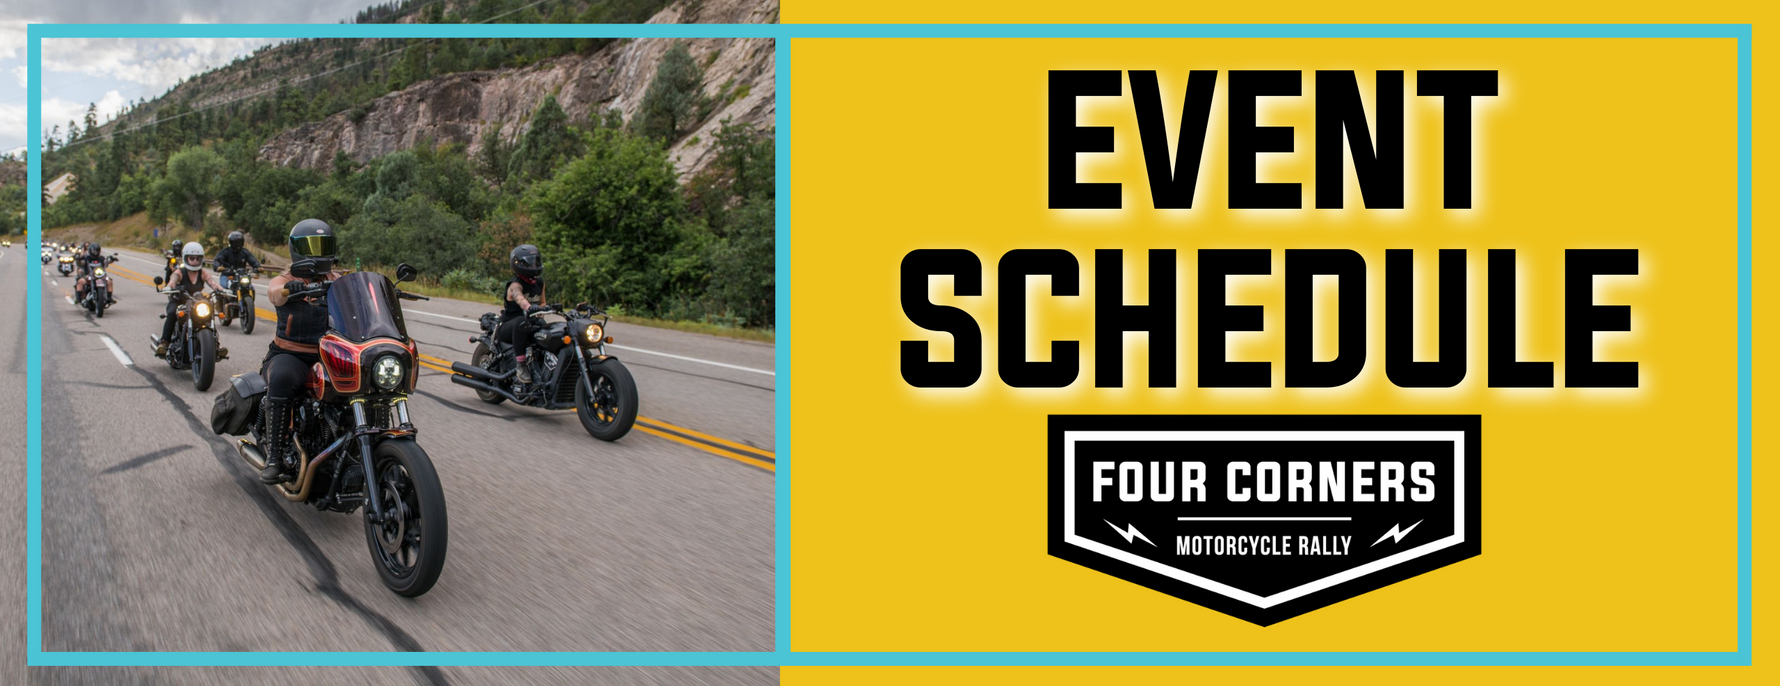 Event Schedule FOUR CORNERS MOTORCYCLE RALLY